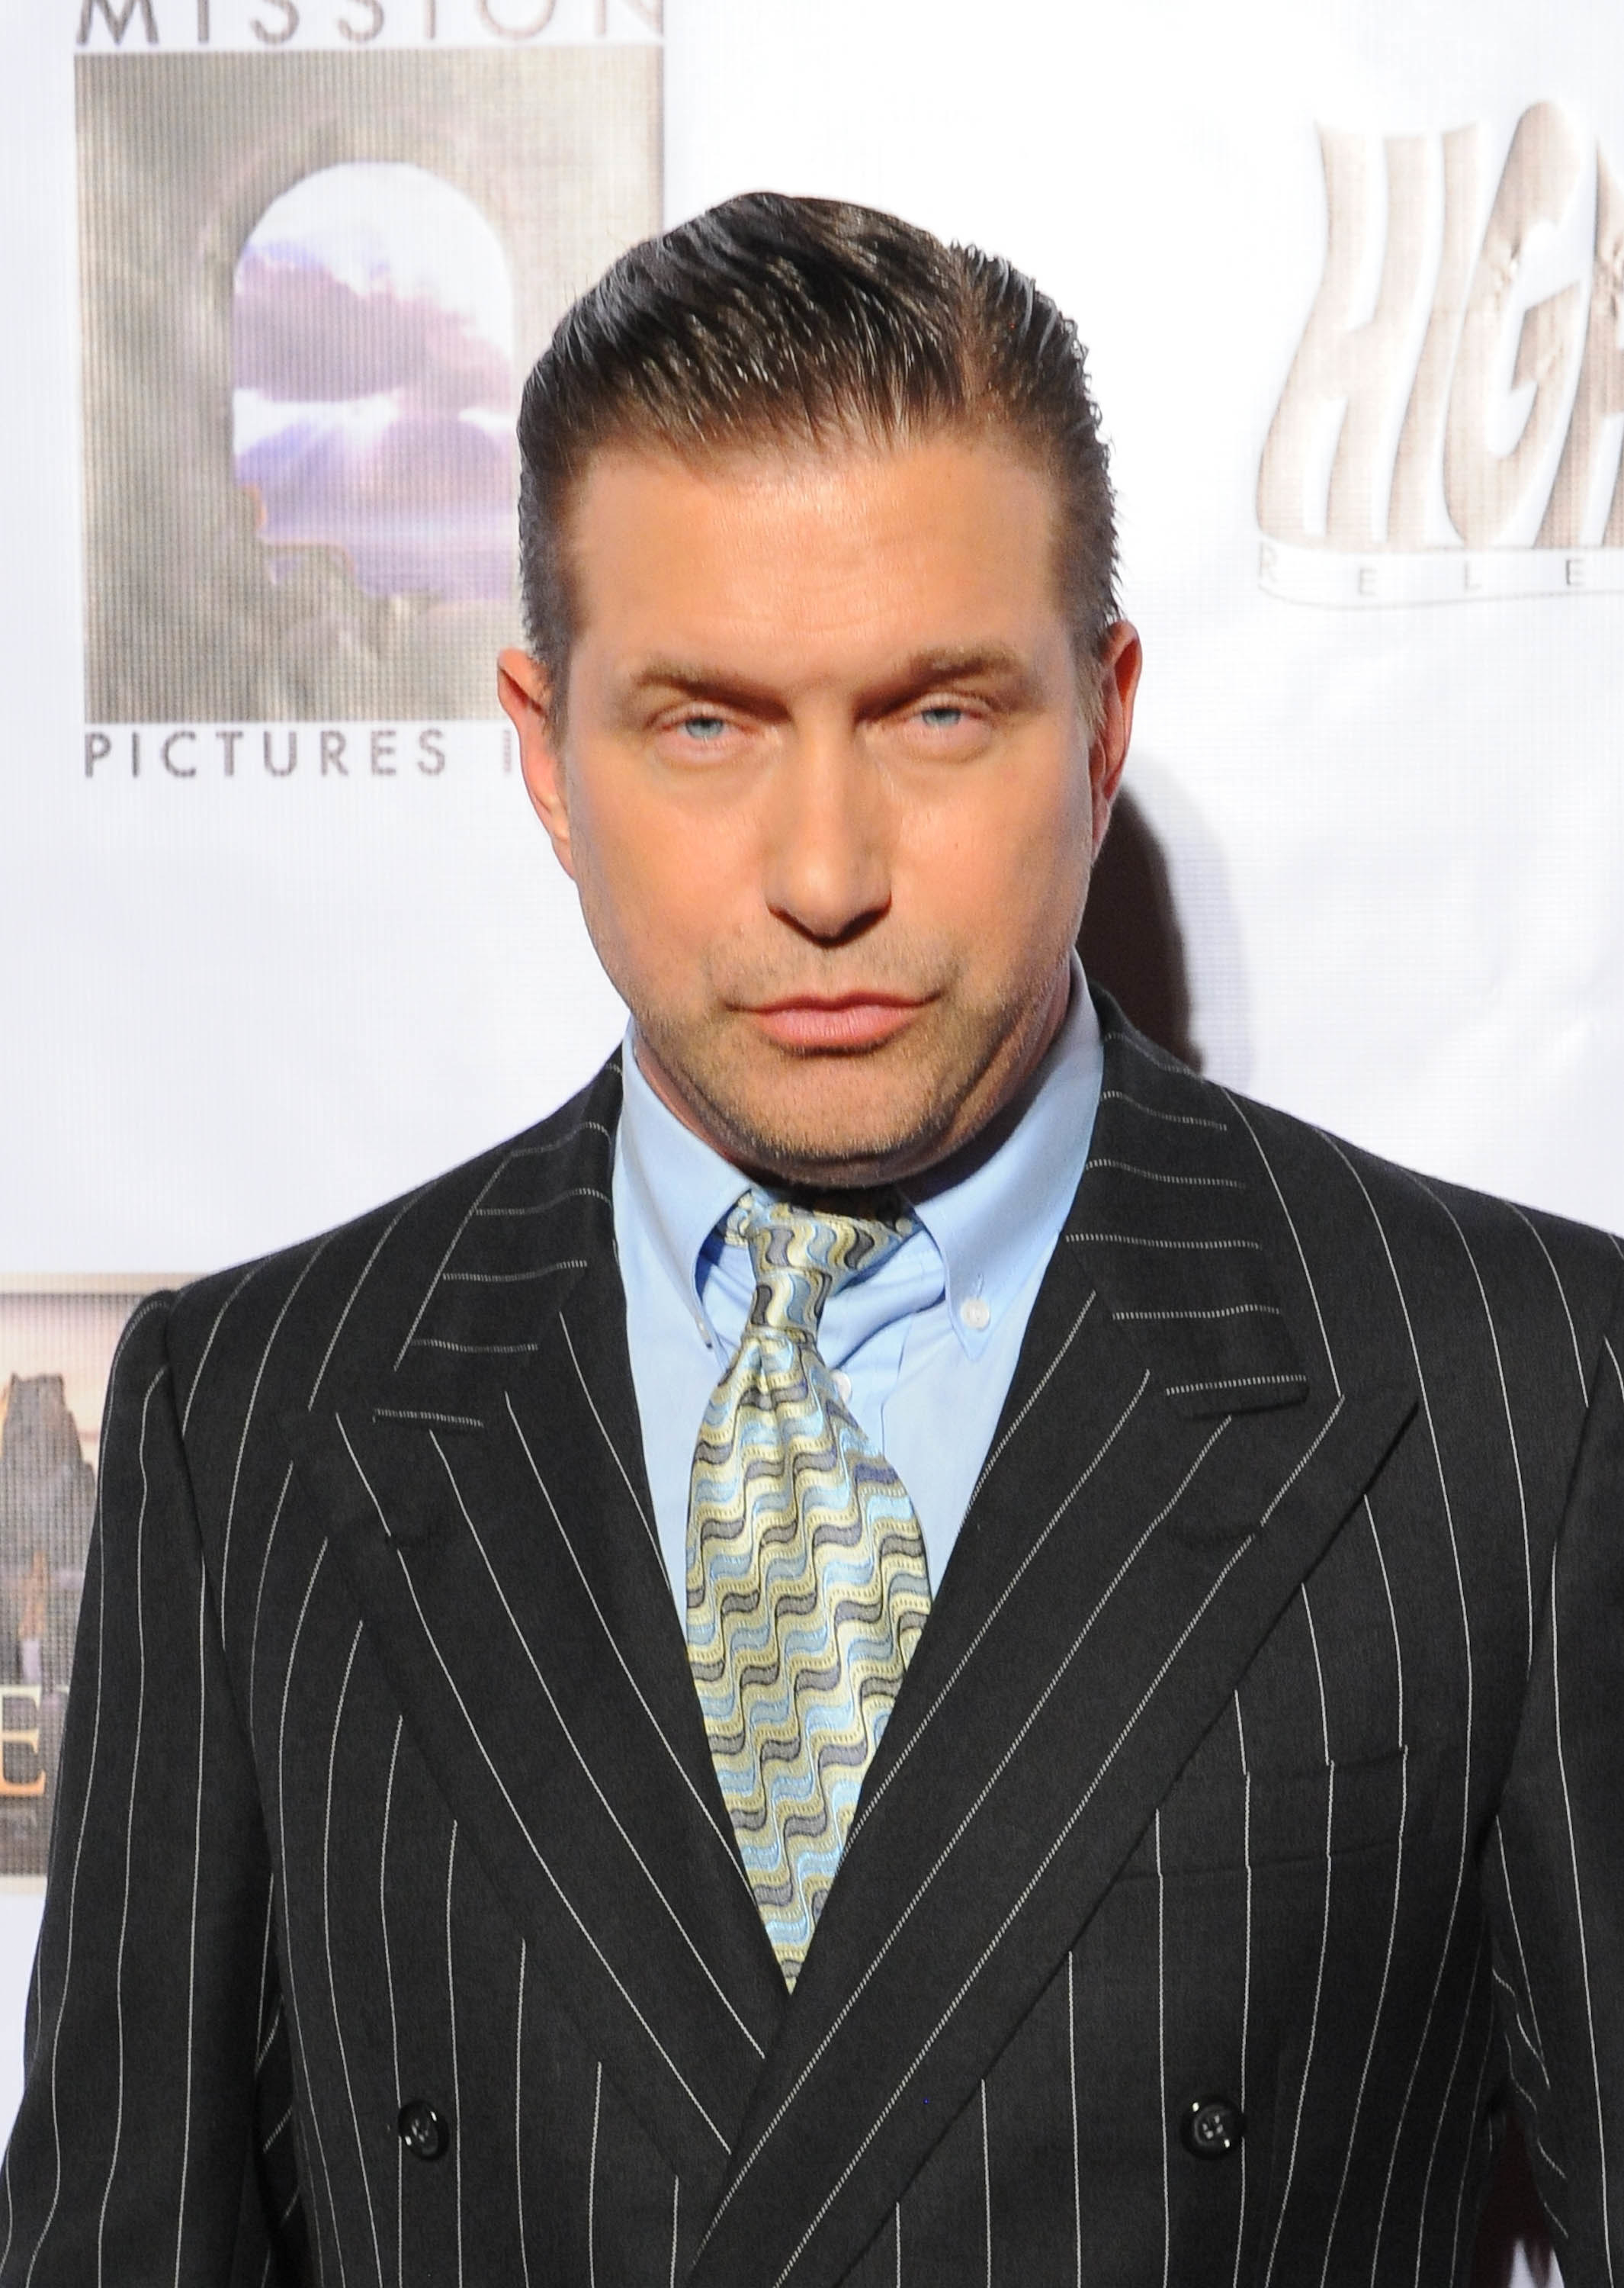 Stephen Baldwin staring down the camera in a pinstripe suit